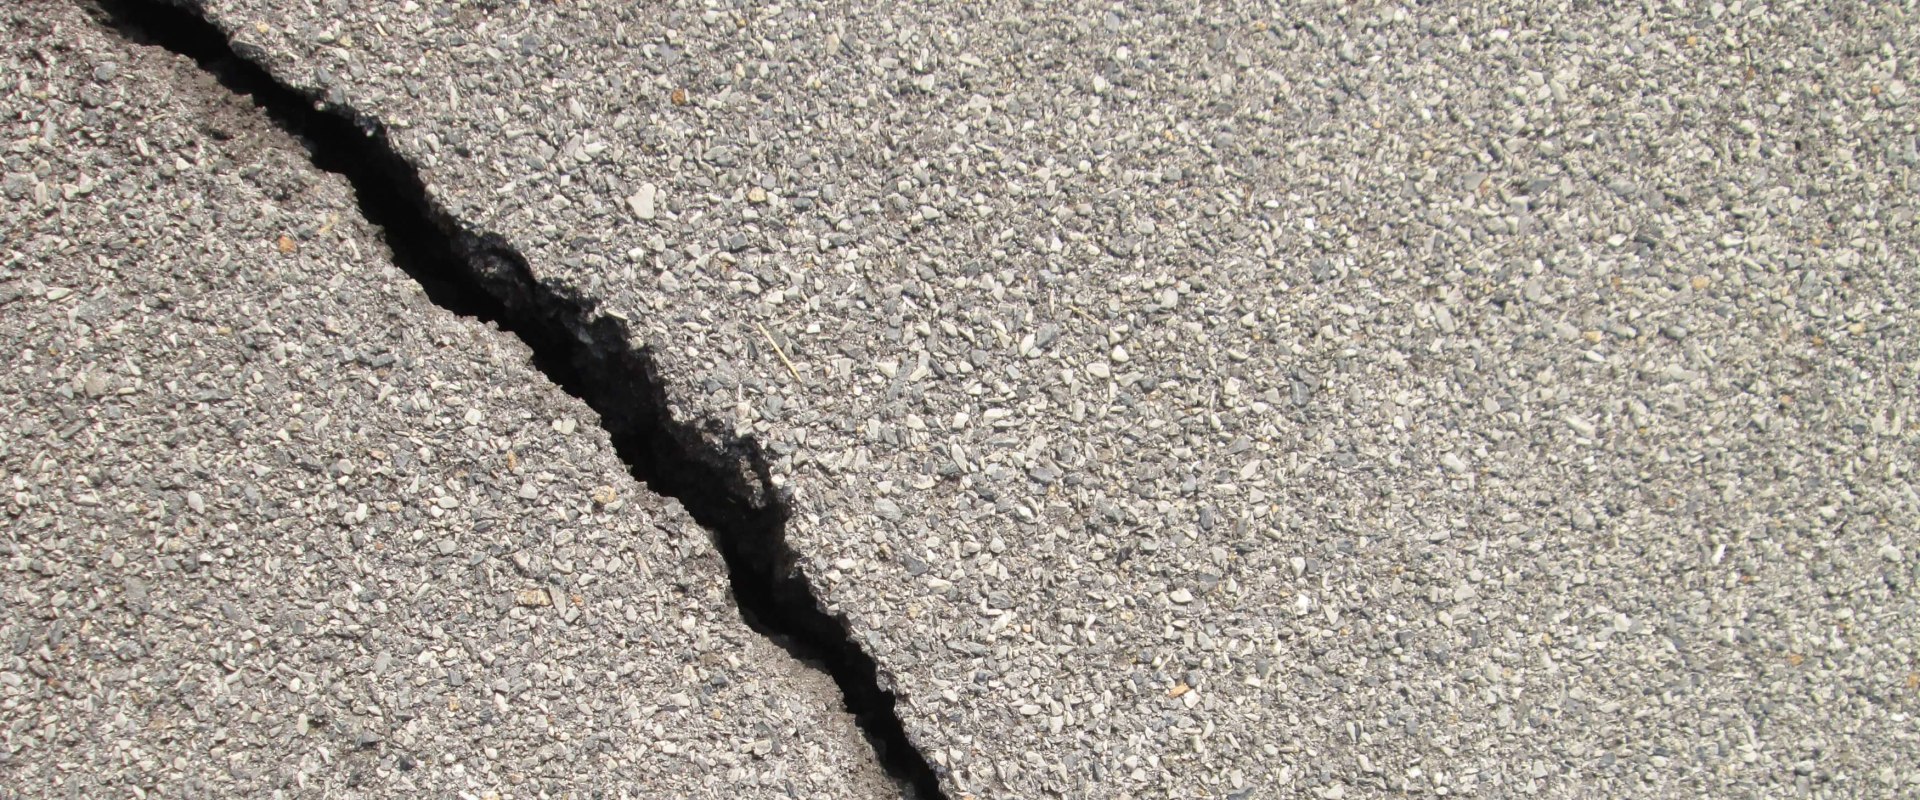 When to repair cracks in the concrete roadway?